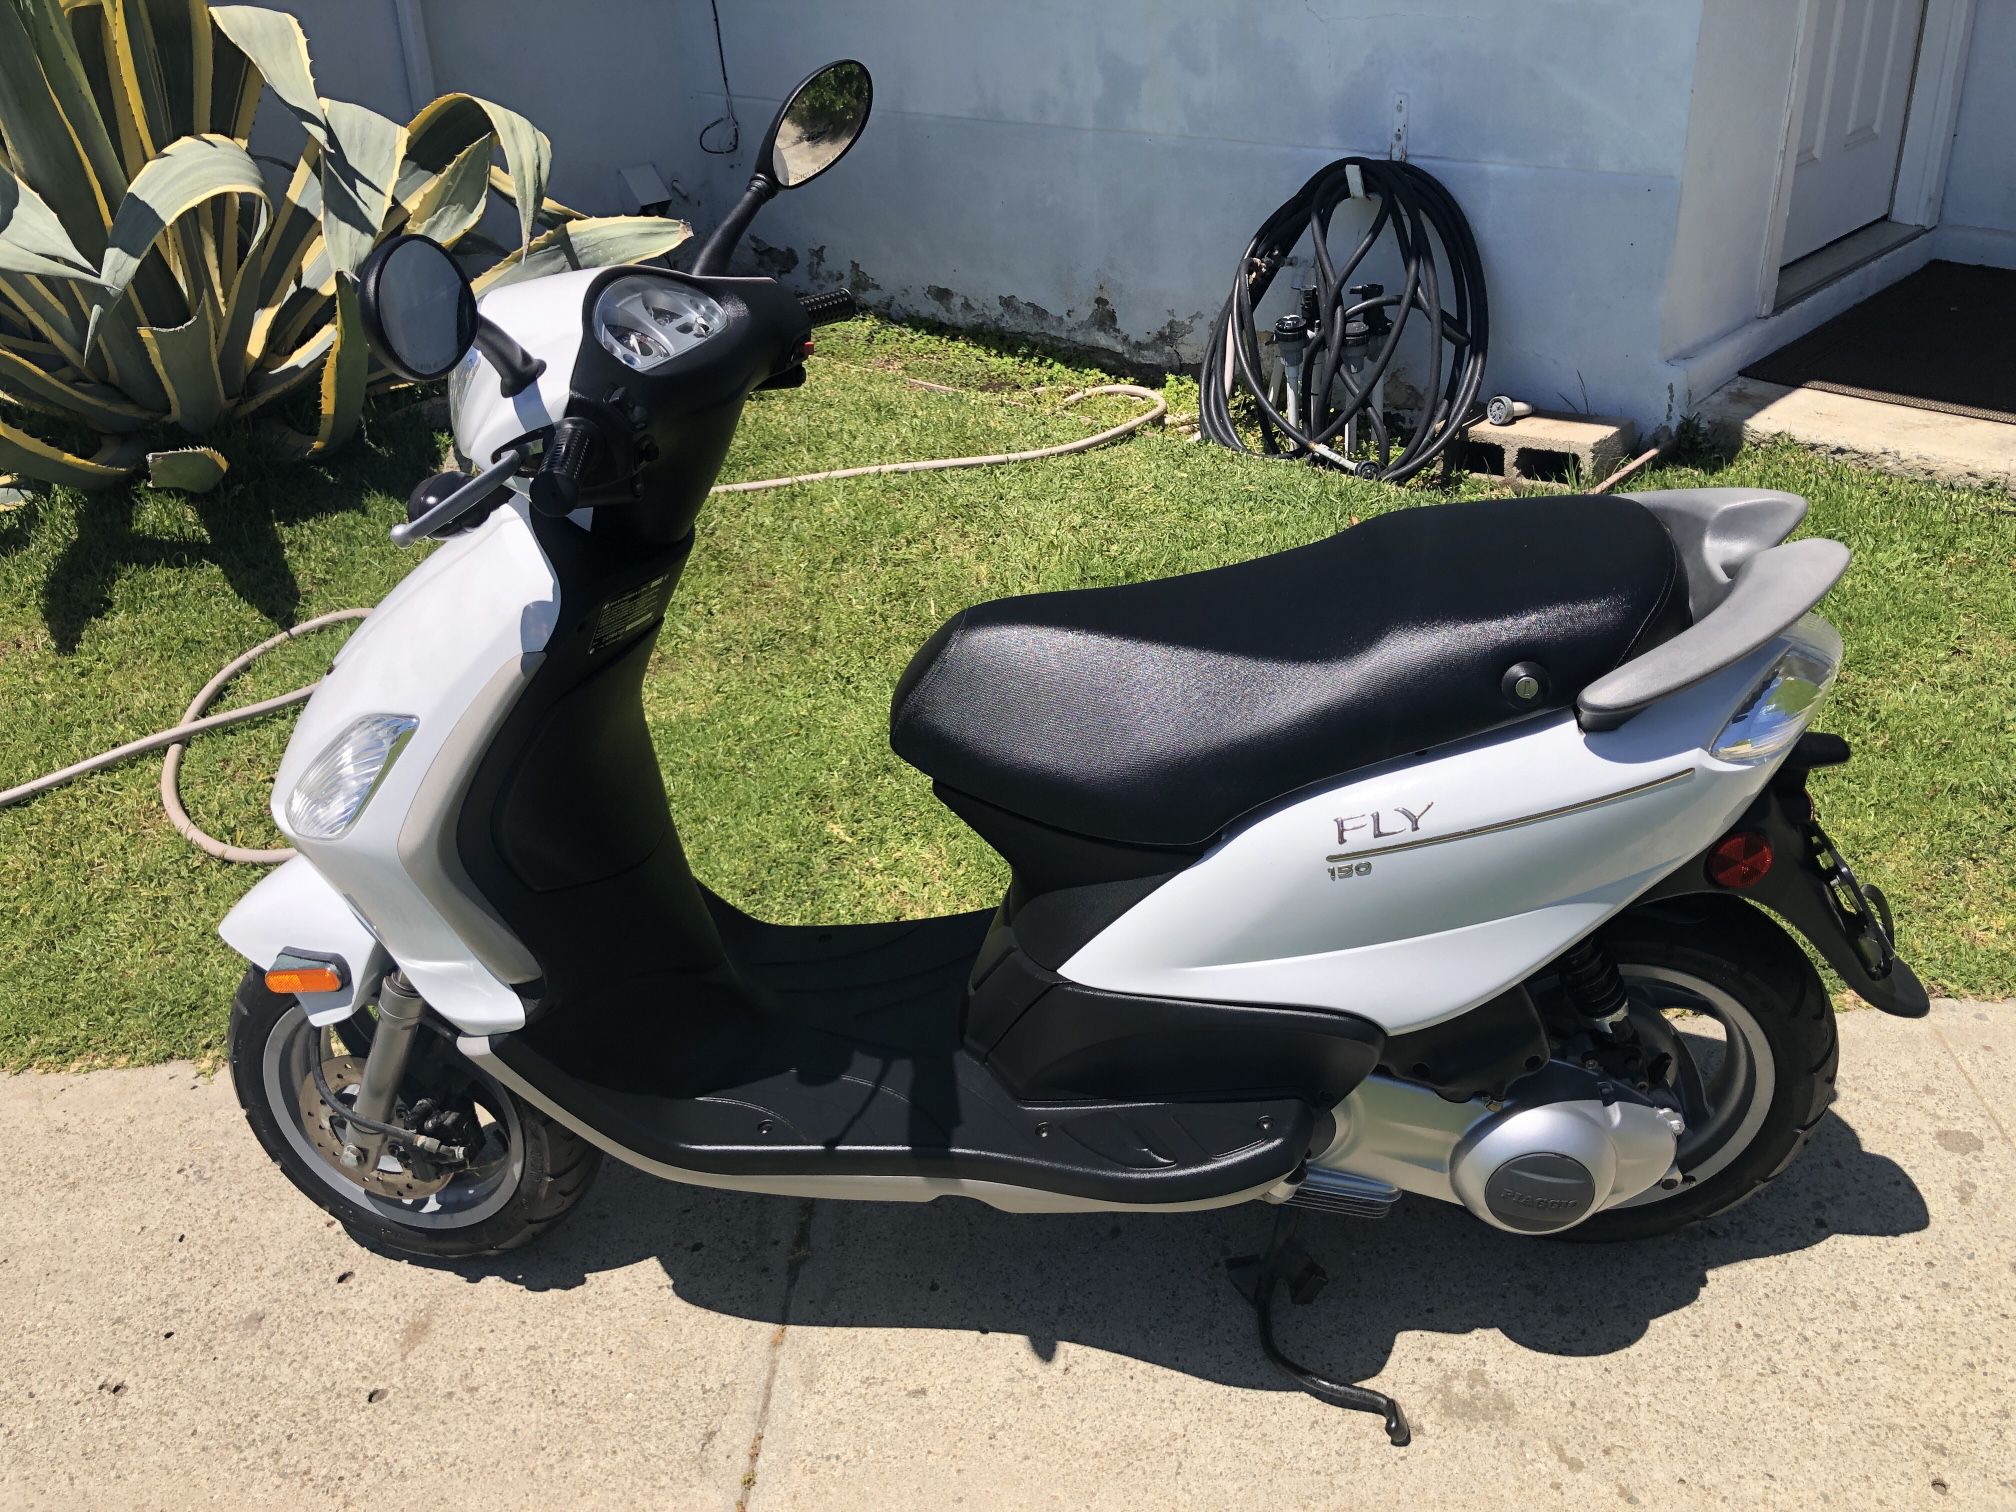 Photo Piaggio Fly 150 Scooter Vespa Only 250 Miles